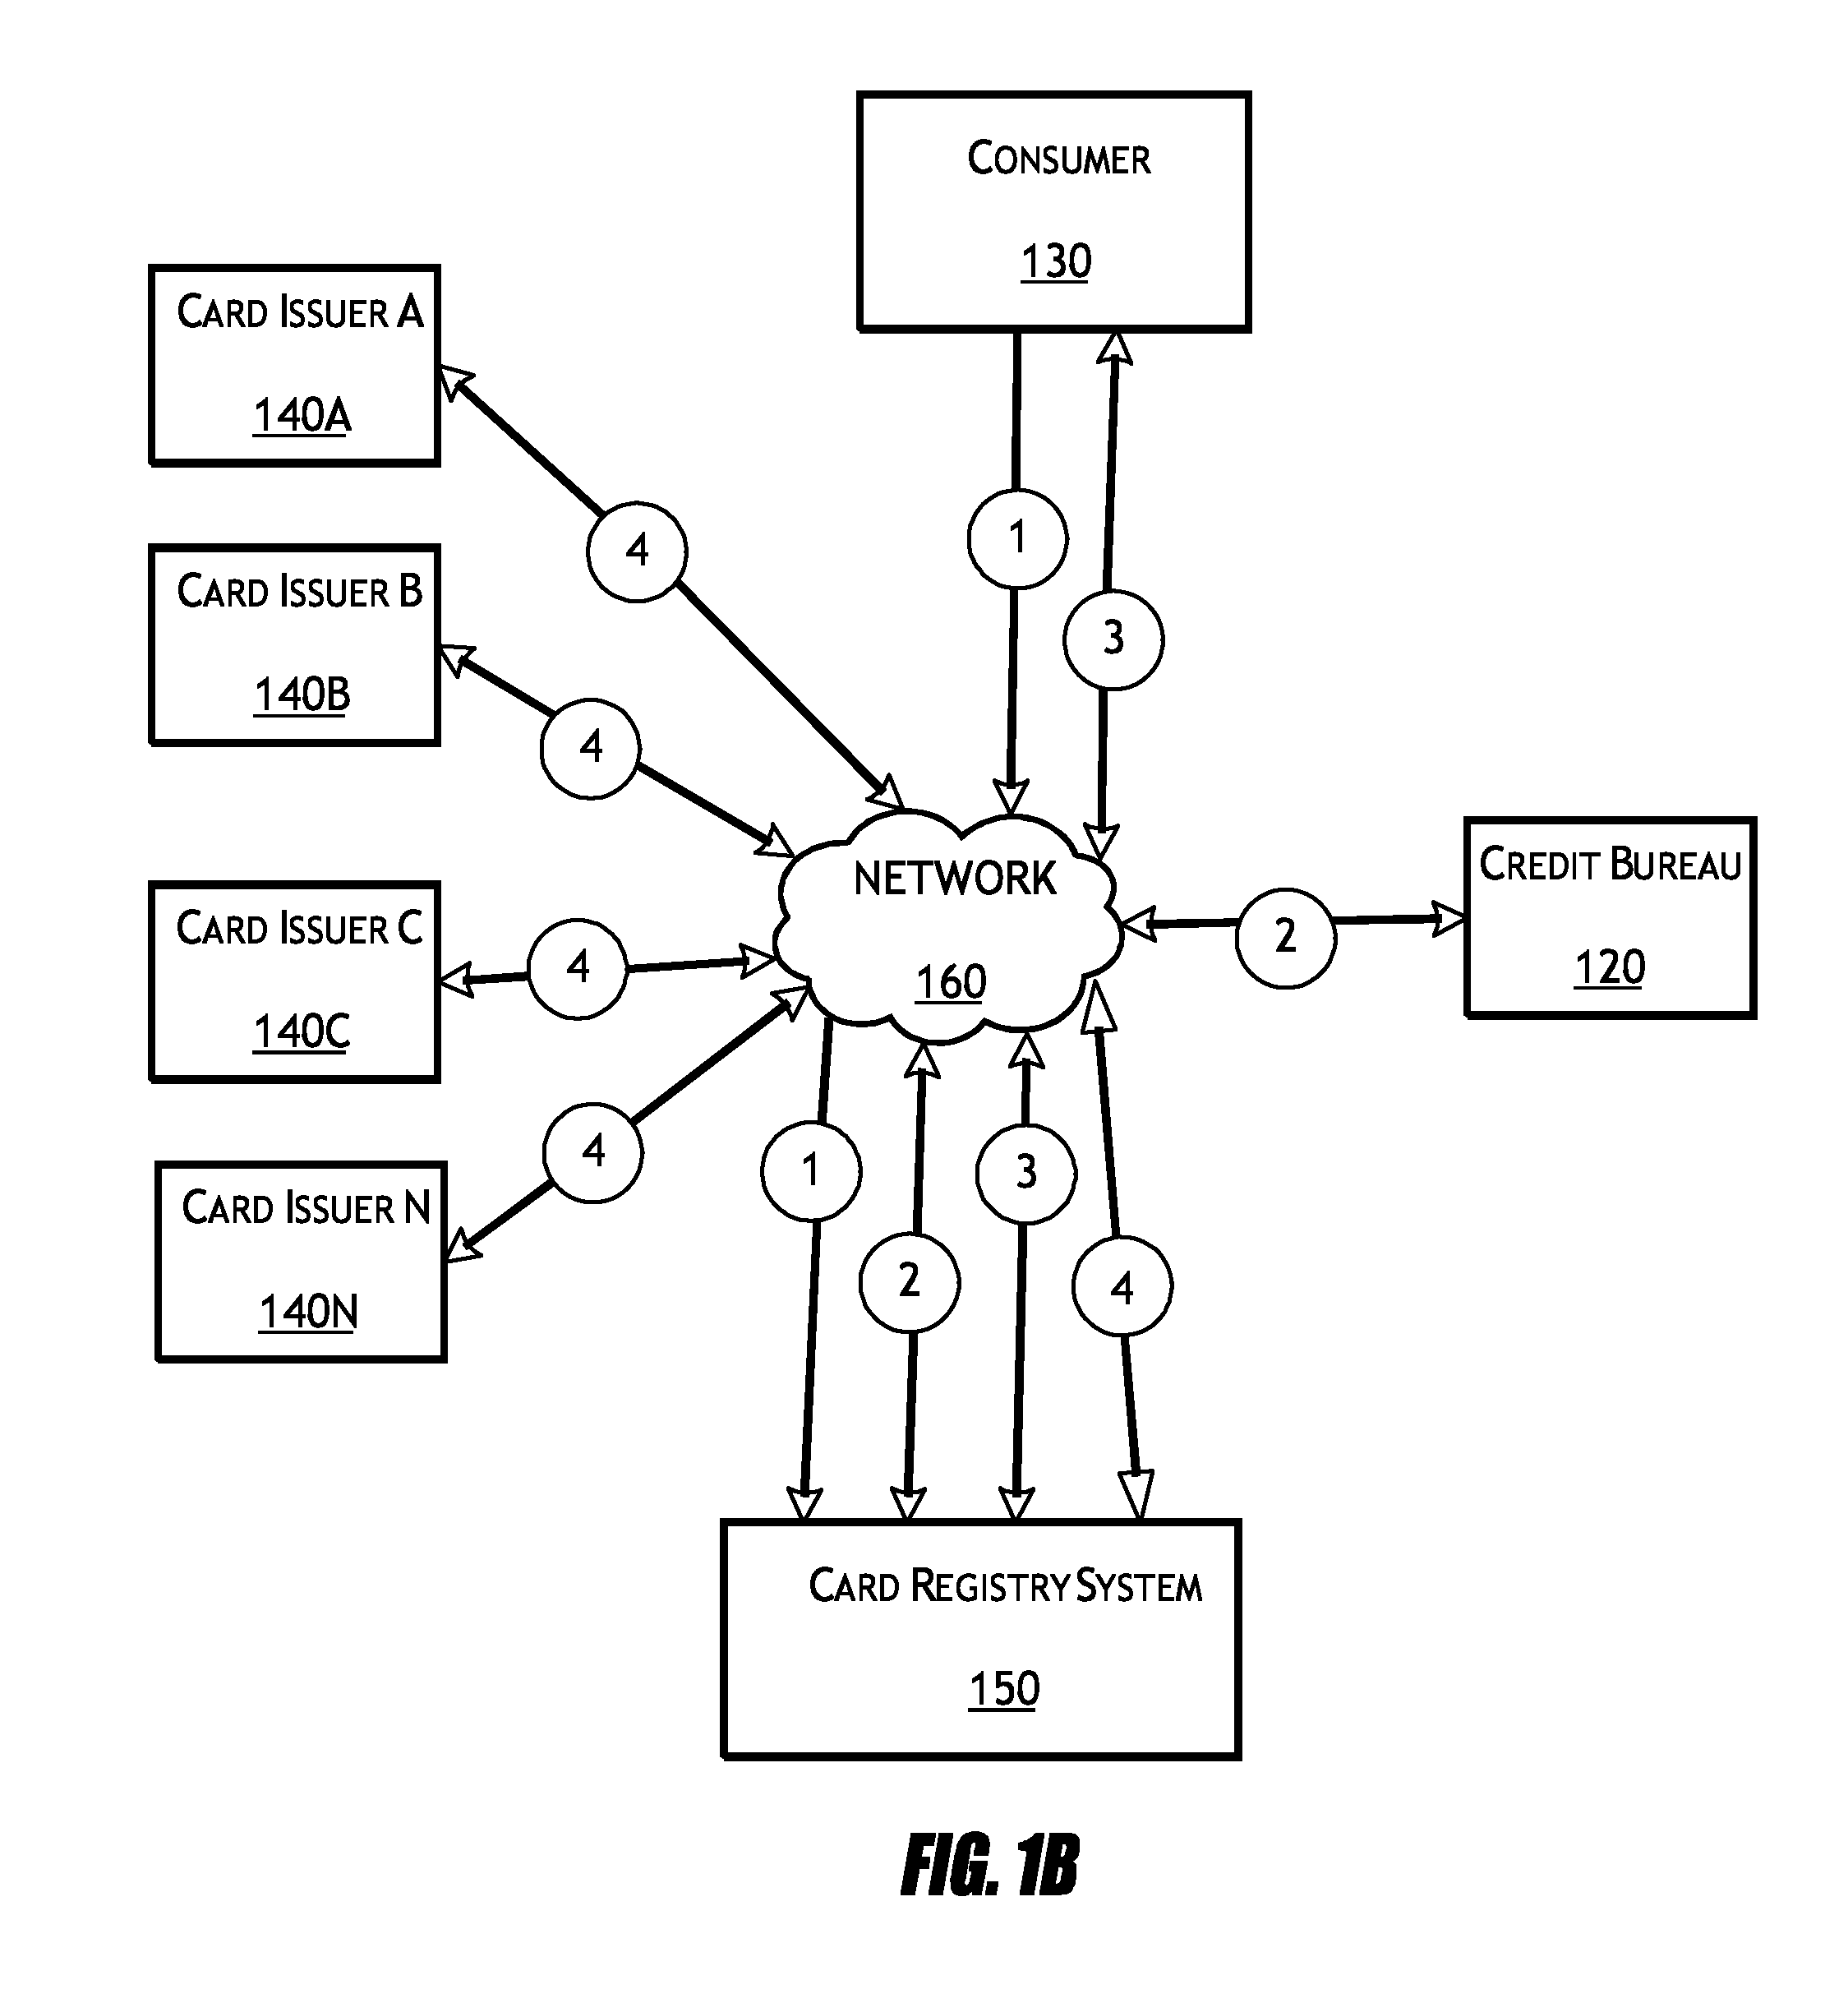 Card registry systems and methods